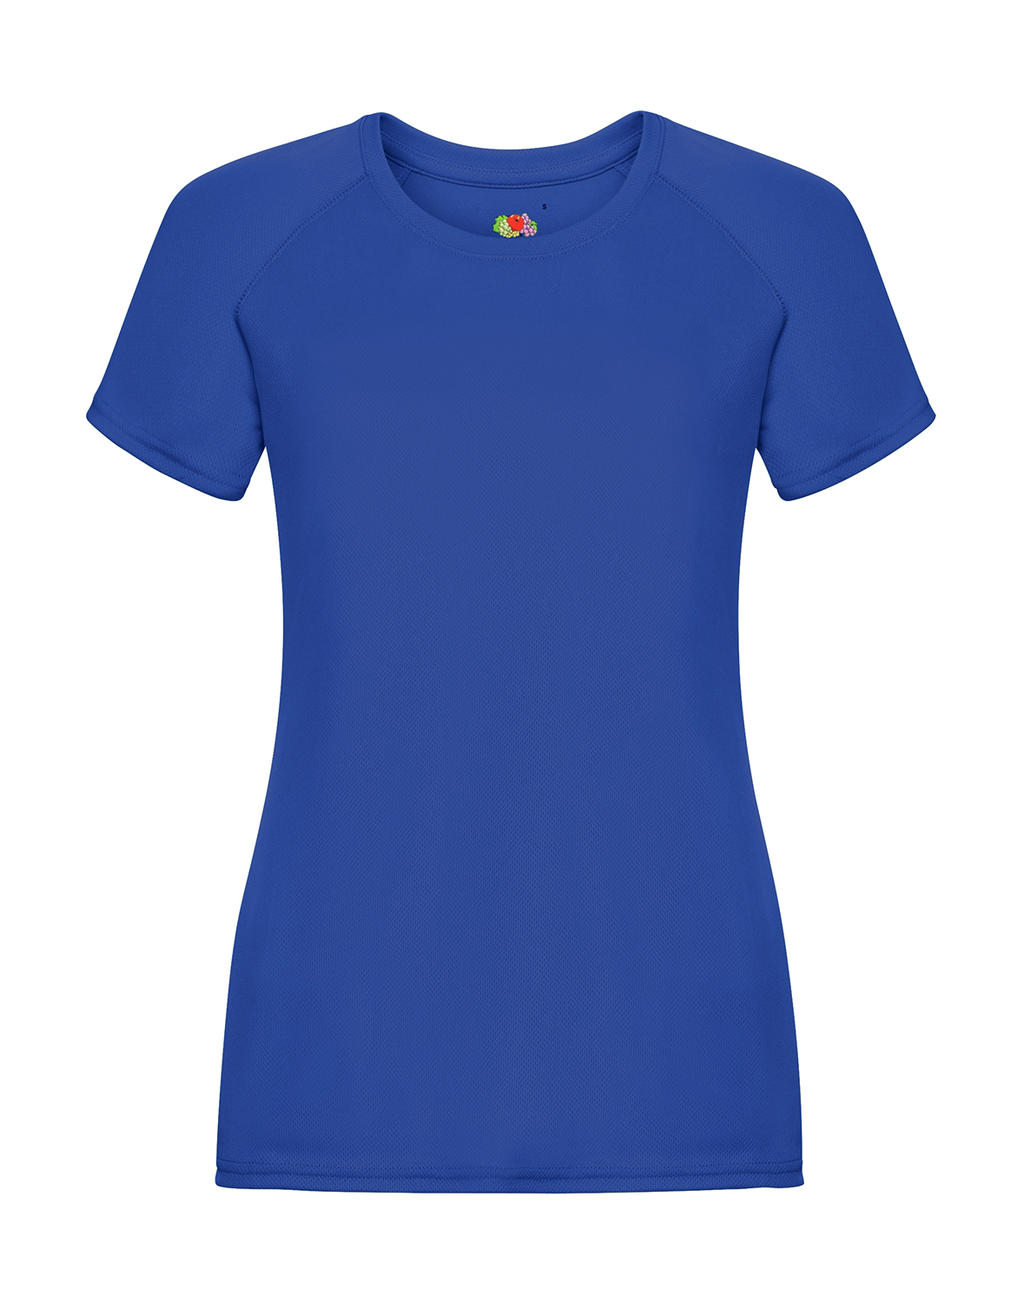  Ladies Performance T in Farbe Royal